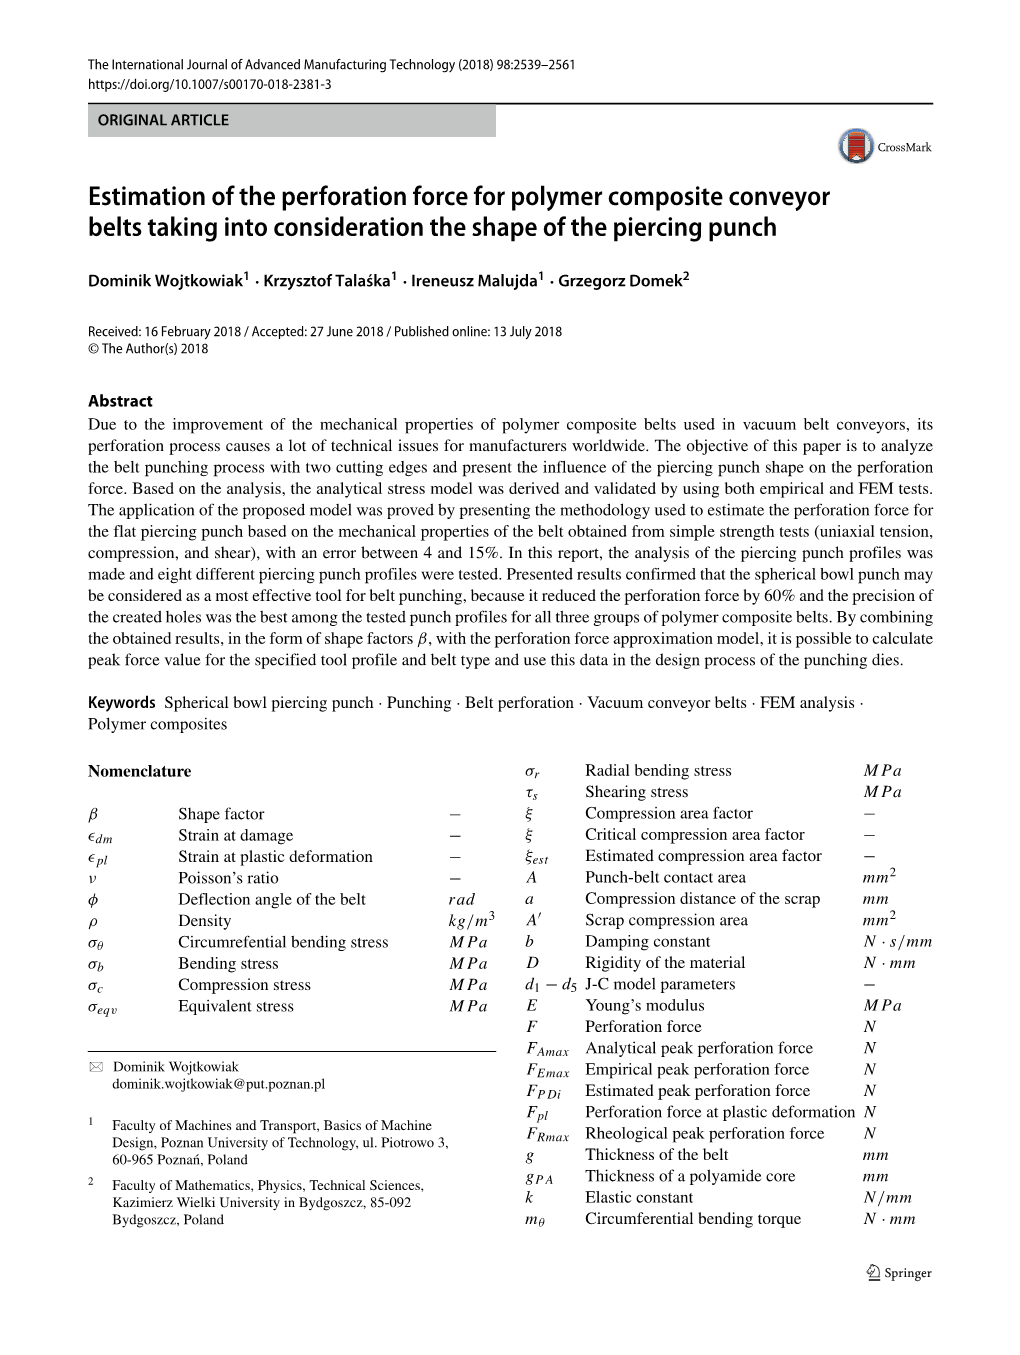 Estimation of the Perforation Force for Polymer Composite Conveyor Belts Taking Into Consideration the Shape of the Piercing Punch